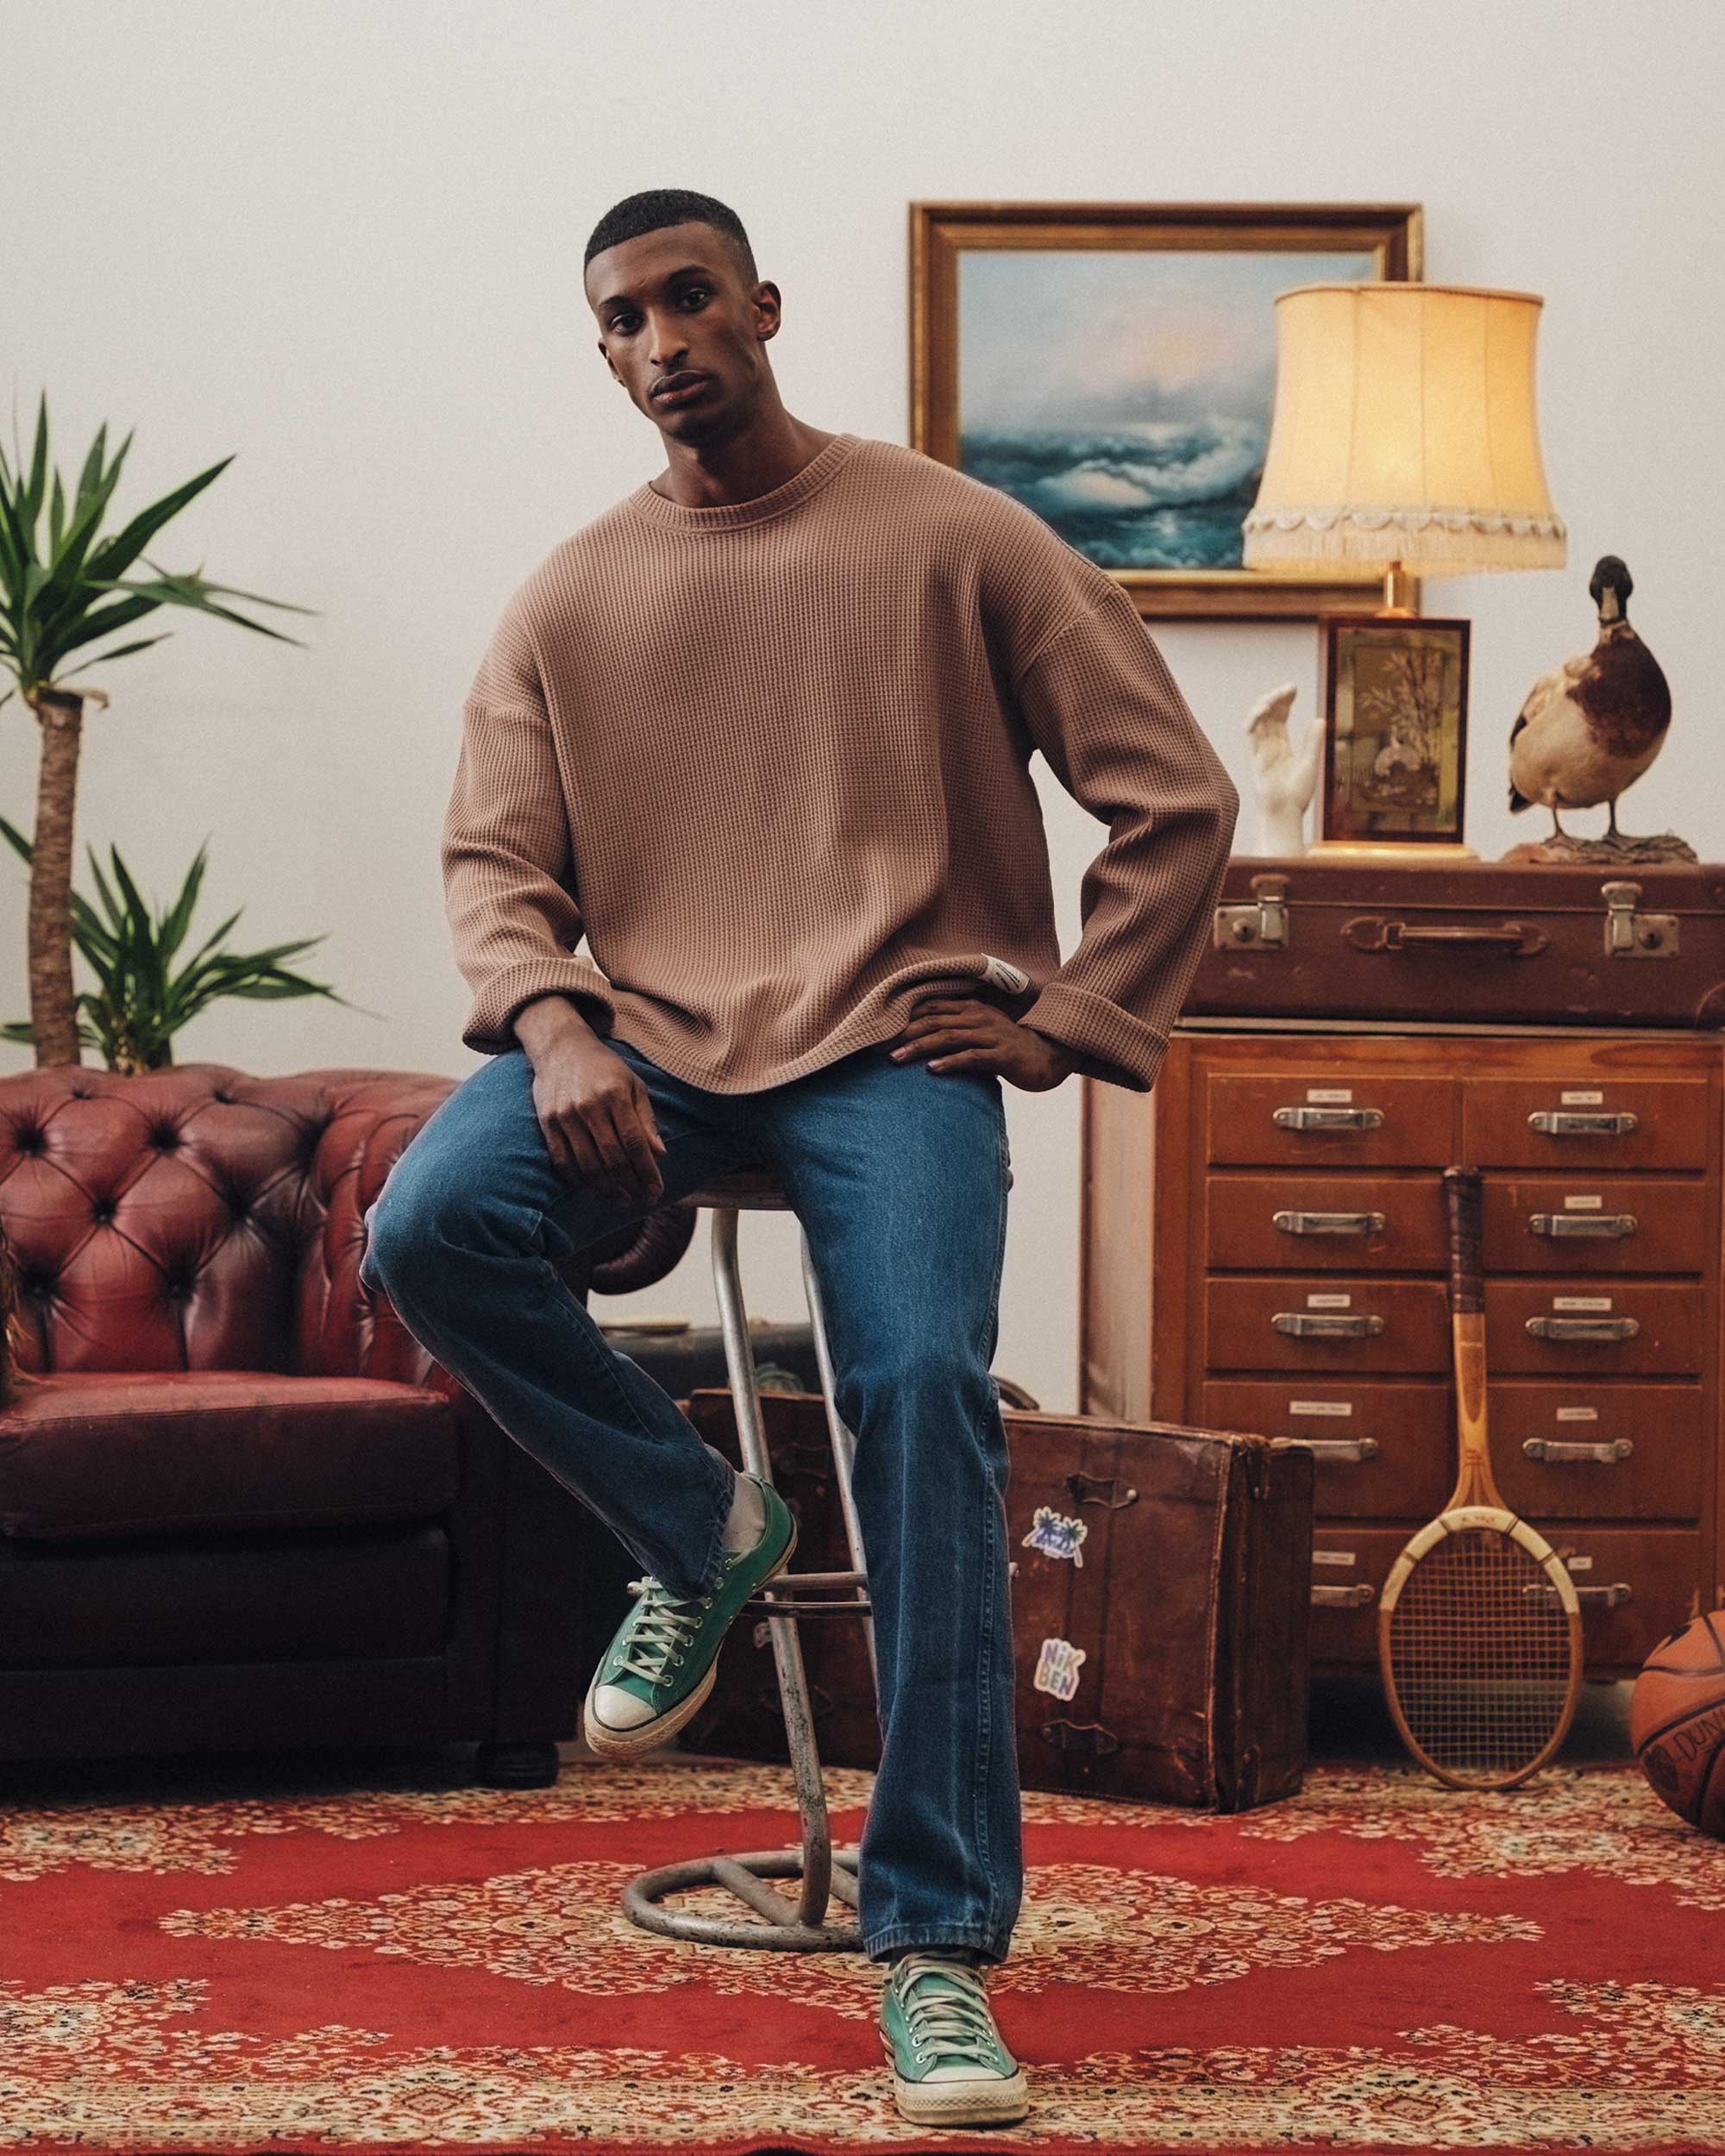 Male model wearing a brown waffle-patterned sweatshirt with a stitched-on material label.